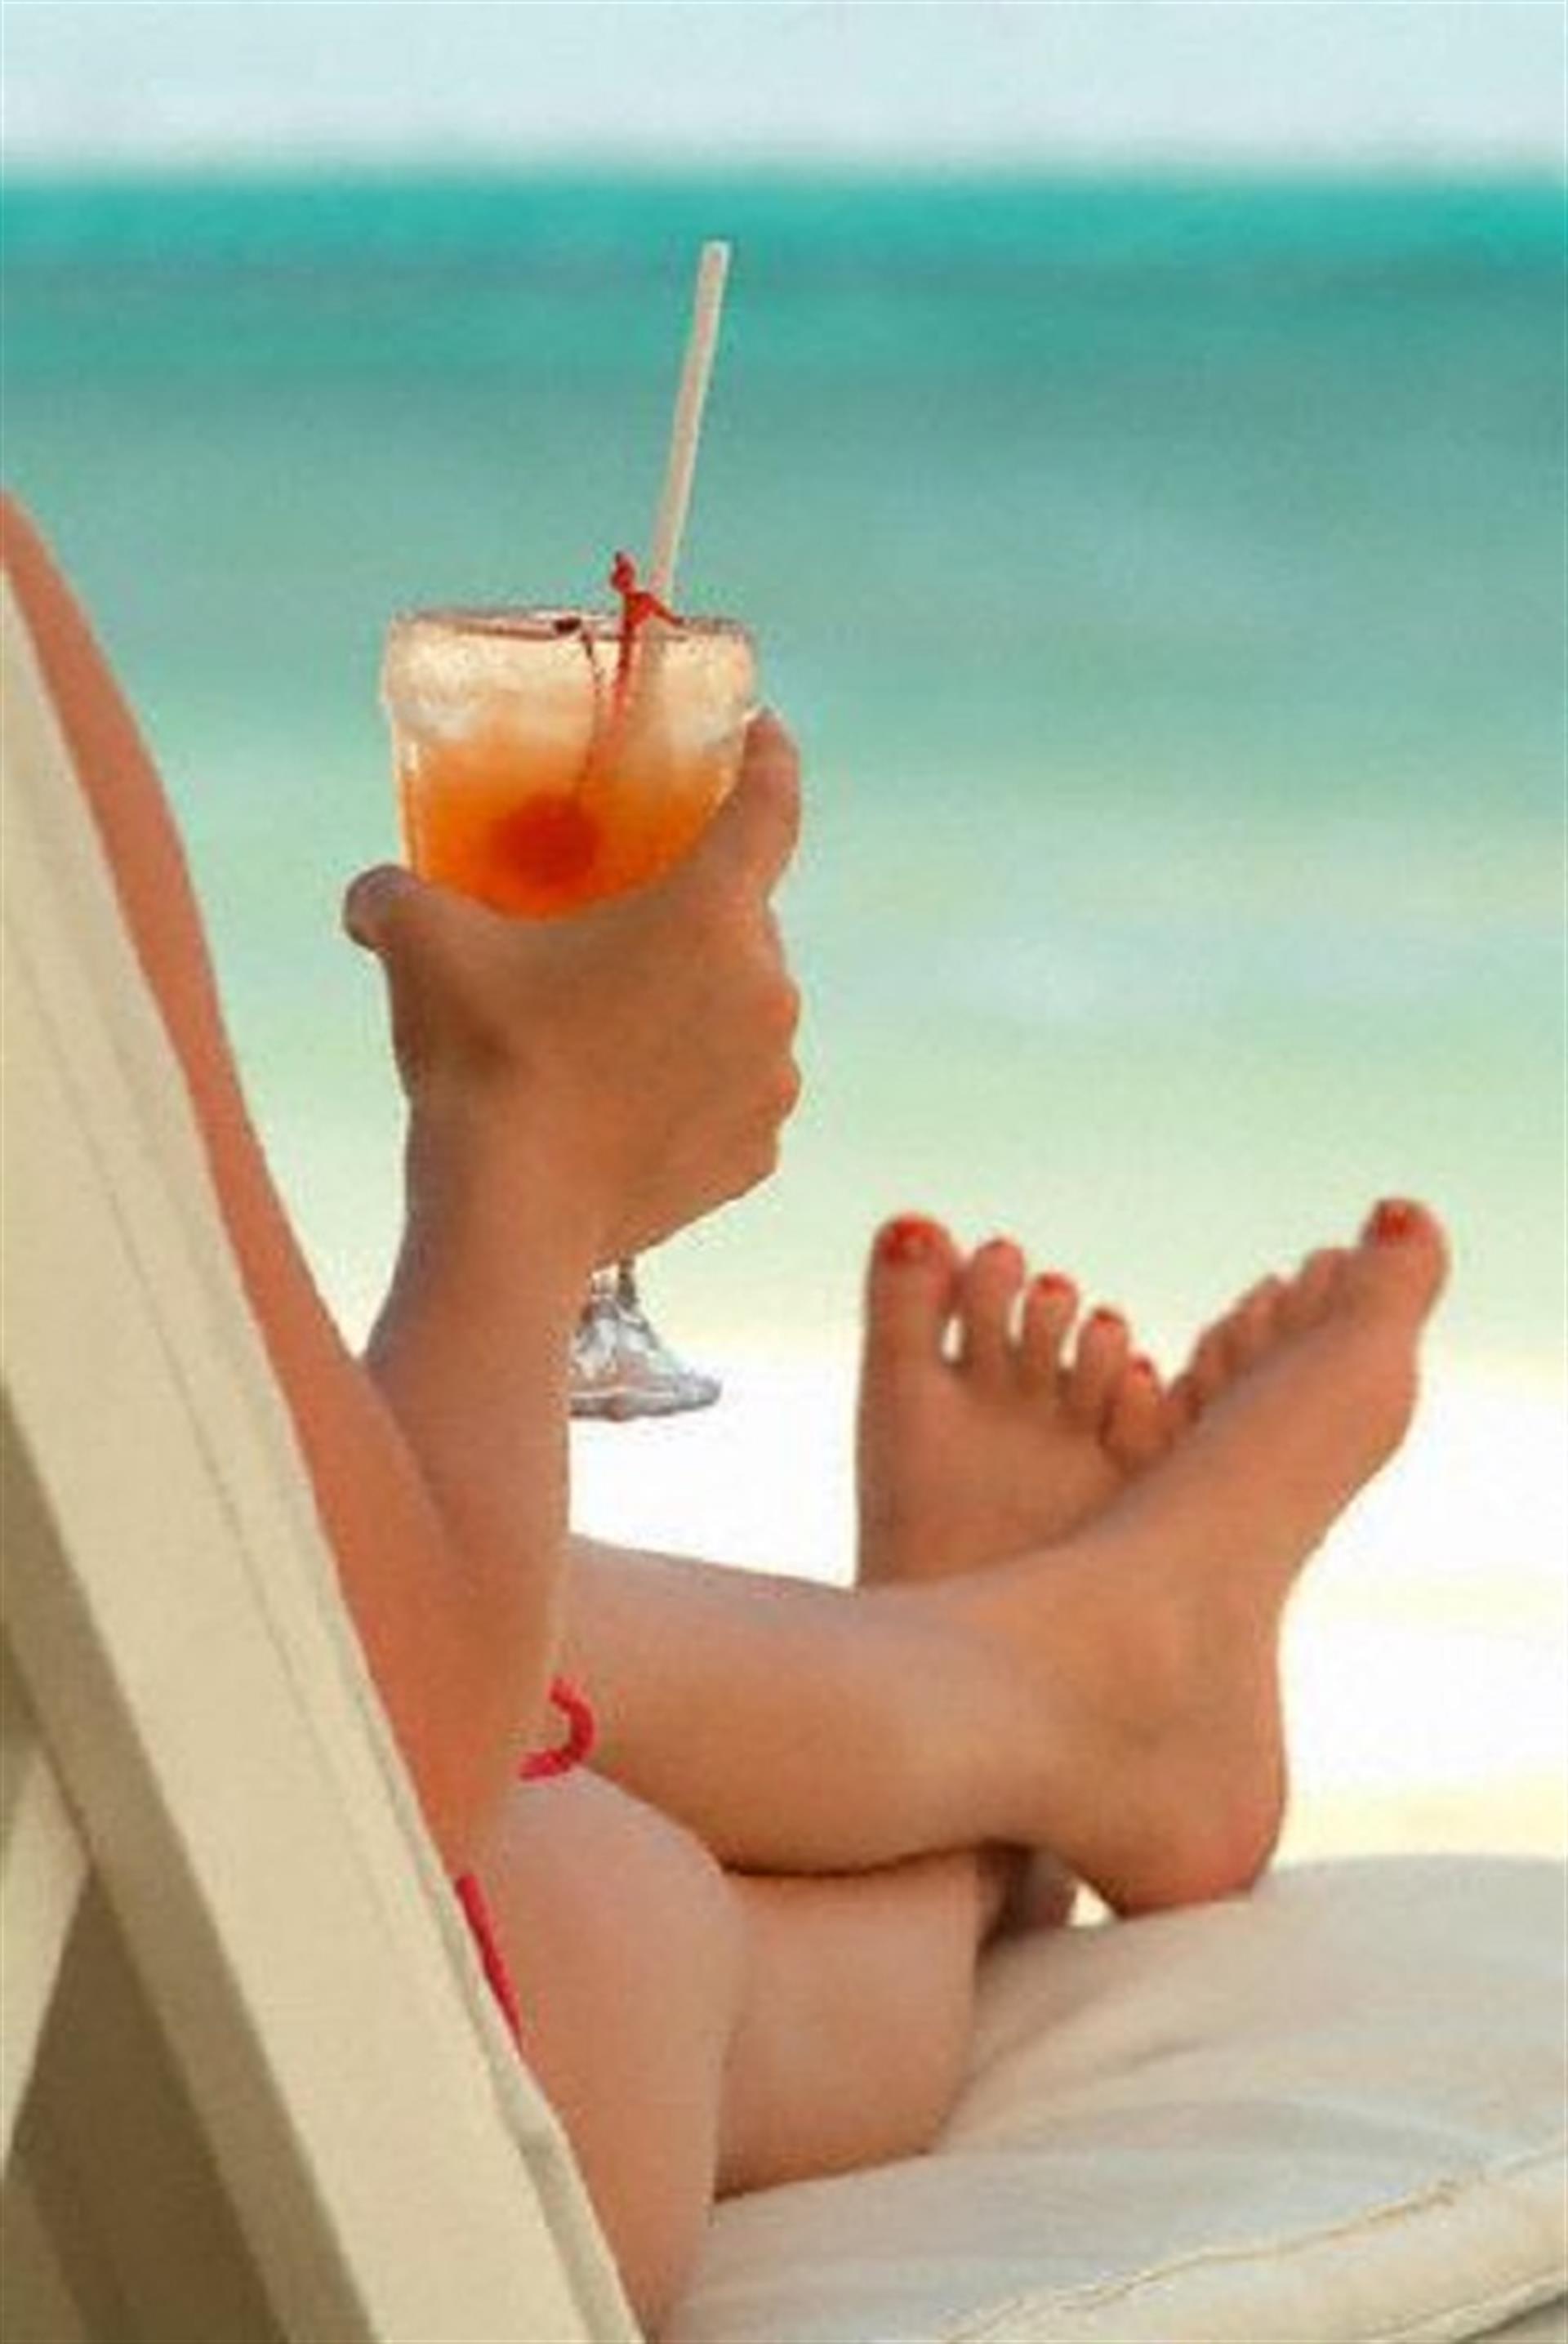 Cocktails on the beaches of BHI